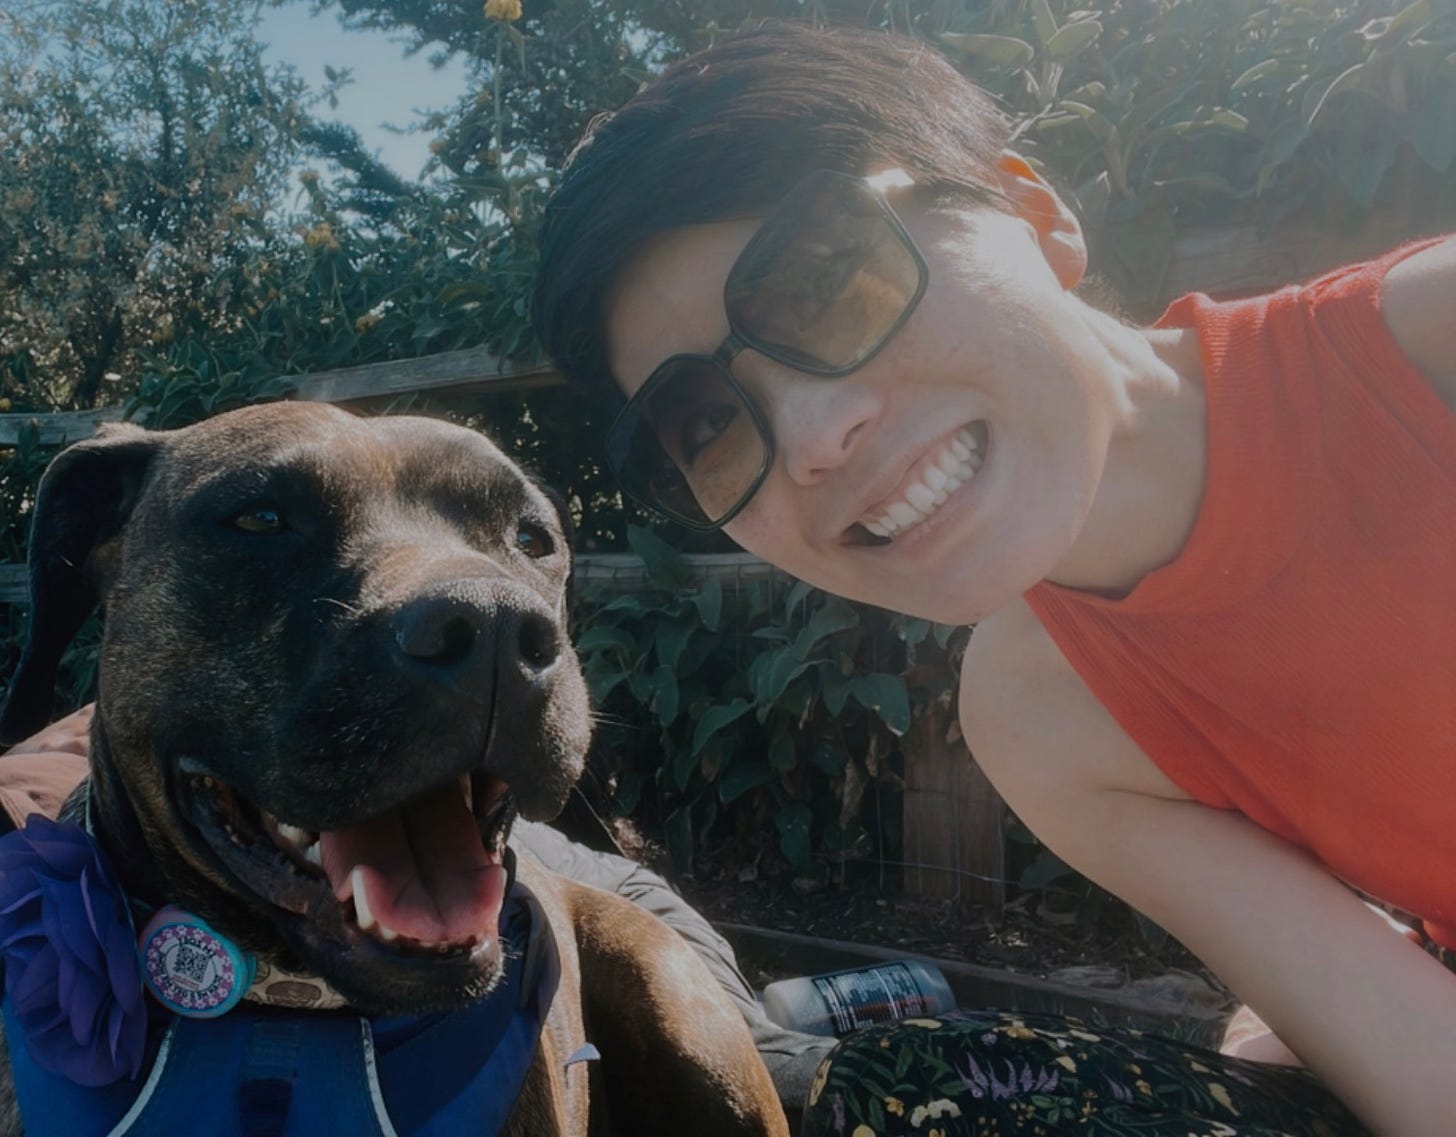 On the left half, a pitmix dog grinning and on right, an East Asian woman with a pixie cut, red tank, green sunglasses, also smiling